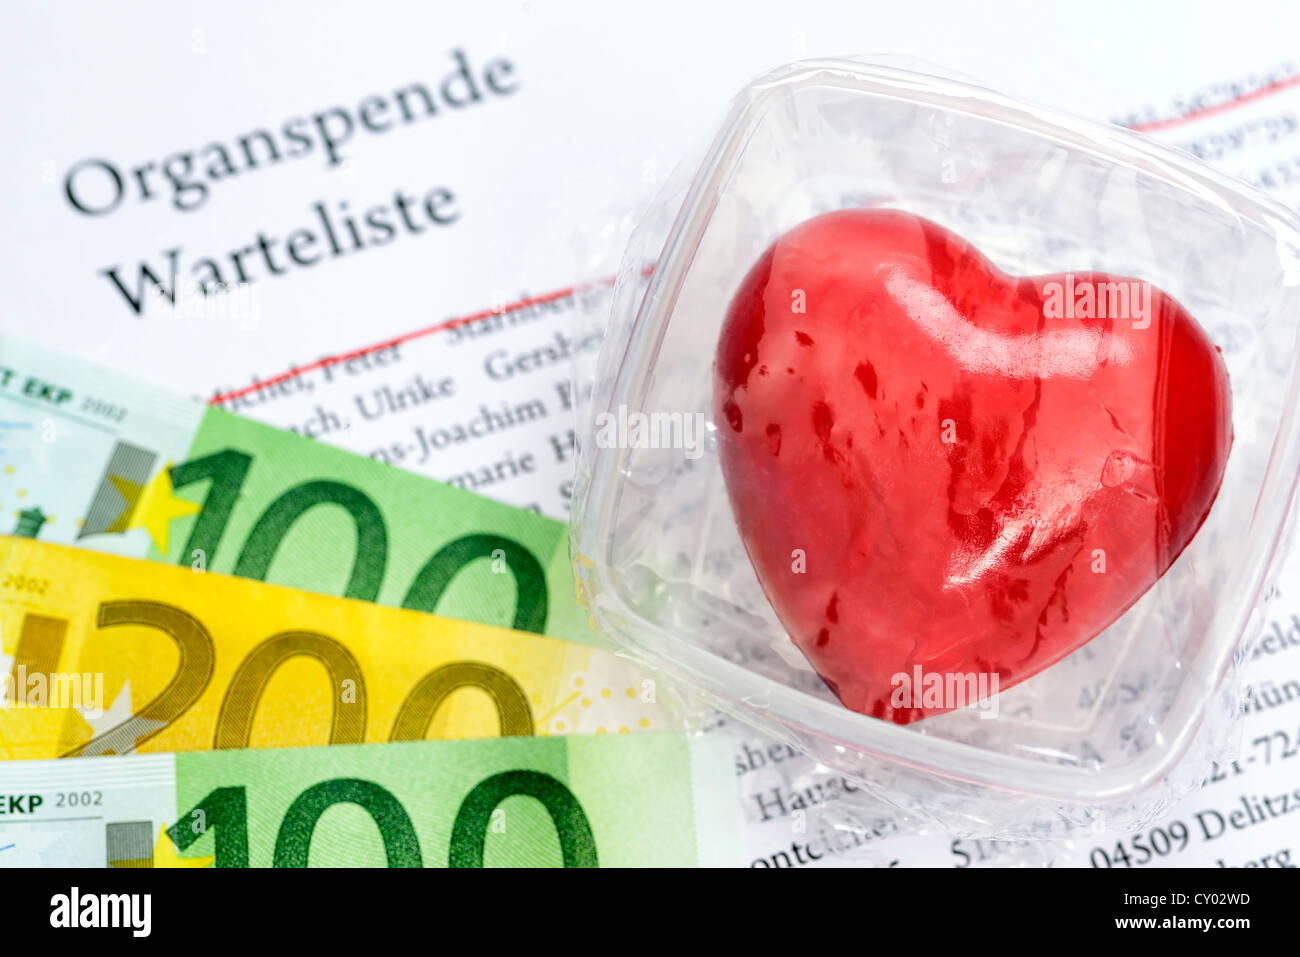 Heart in food storage container on organ donation waiting list, symbolic image for organ donation Stock Photo